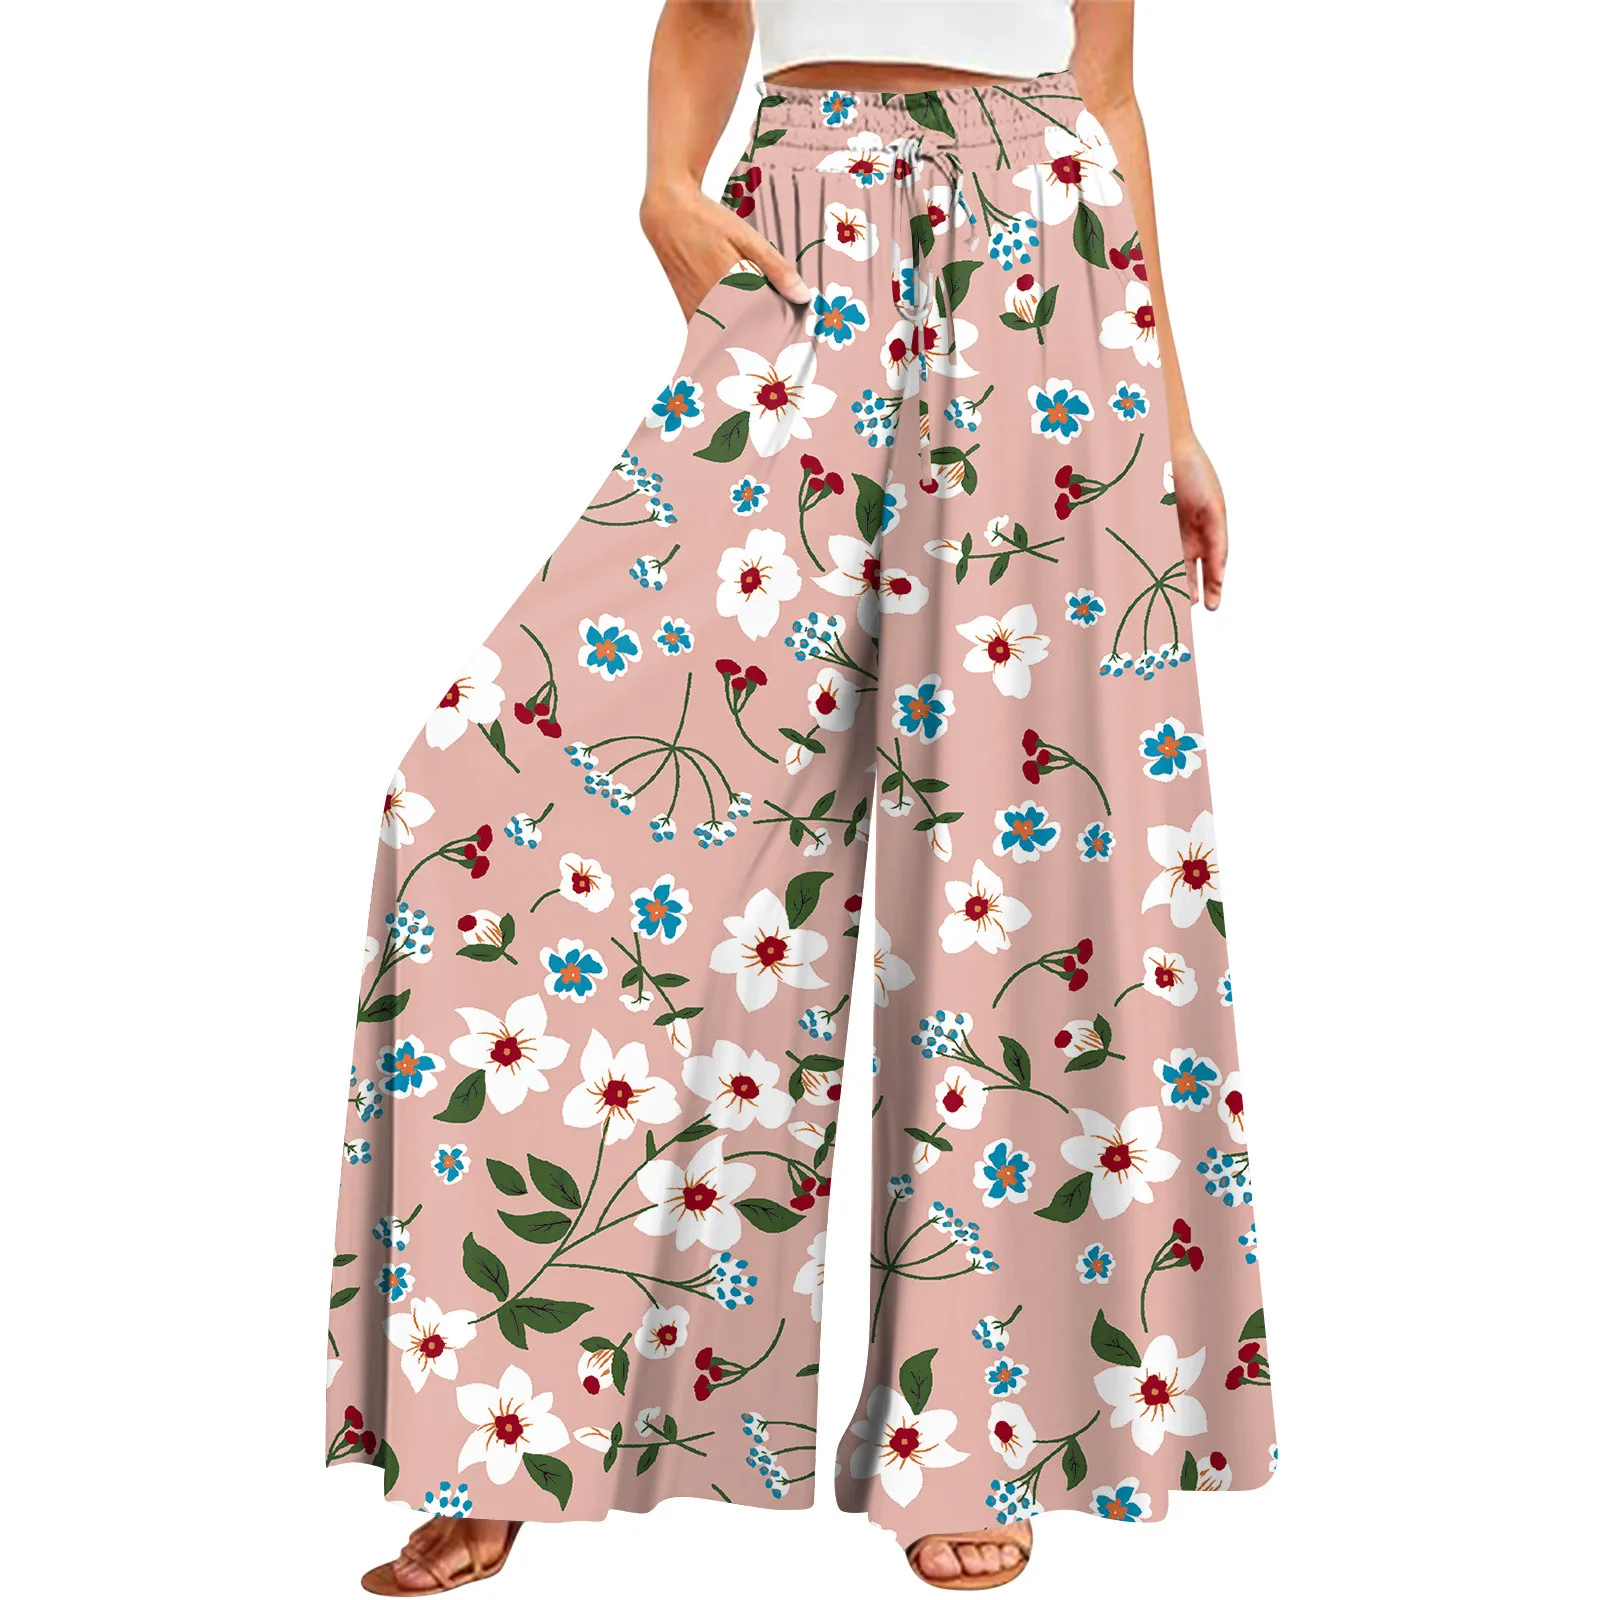 

Women's Summer Wide Leg Pants High Waisted Flowing Pockets Fashion Casual Casual Bohemian Printed Beach Pants traf y2k 2024